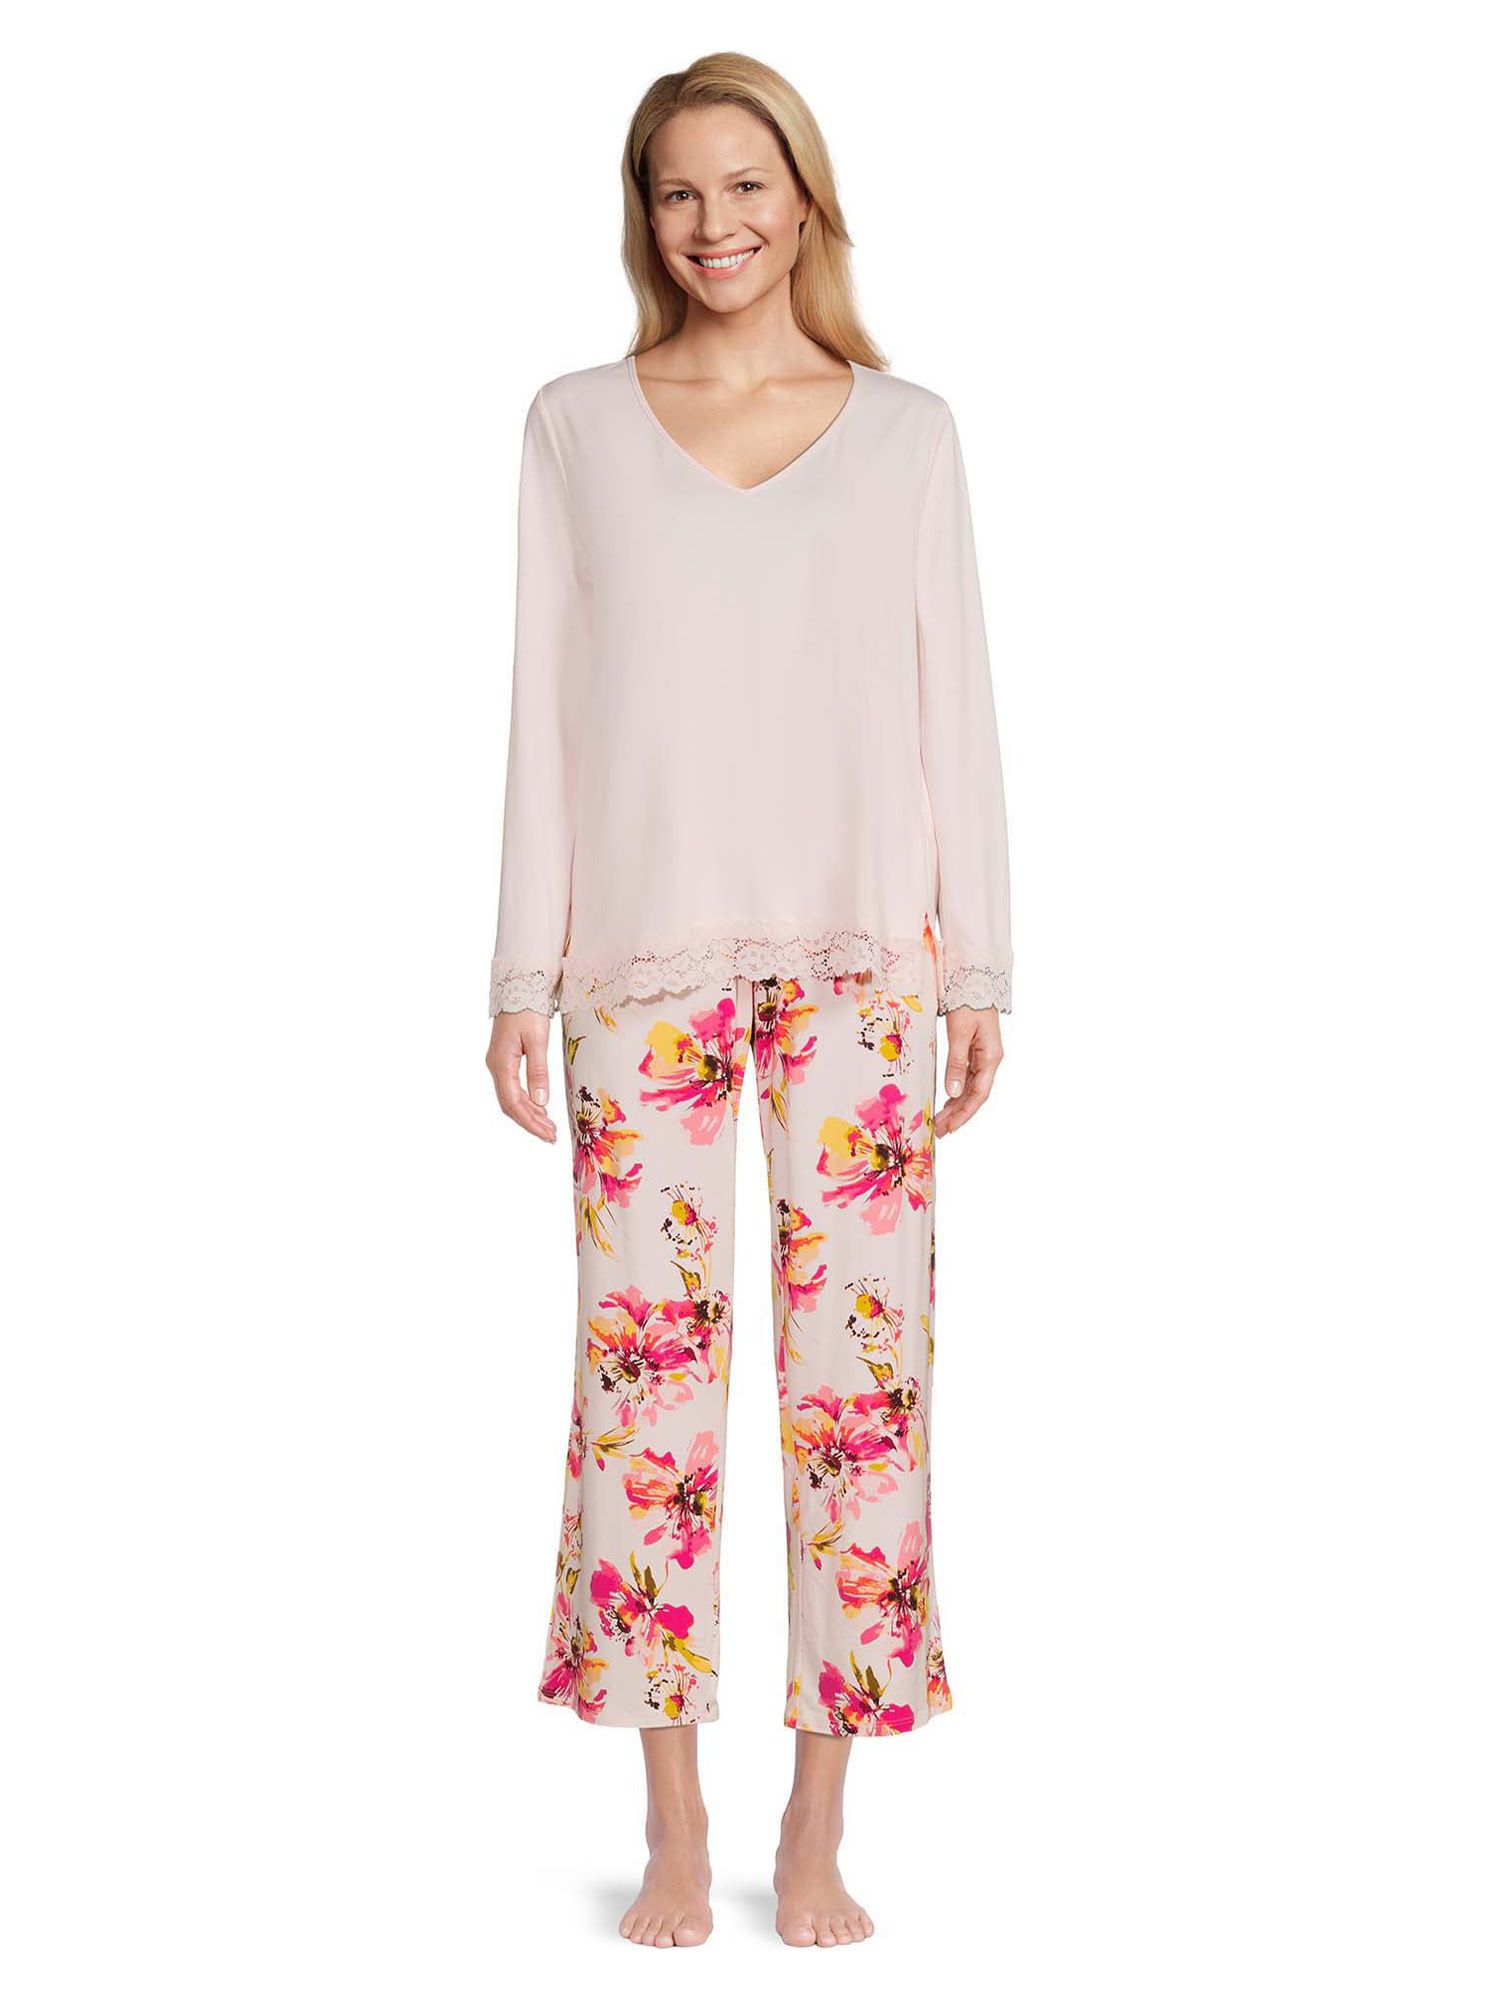 The Pioneer Woman Long Sleeve Top with Lace and Pants Pajama Set, 2-Piece, Women's - image 2 of 6